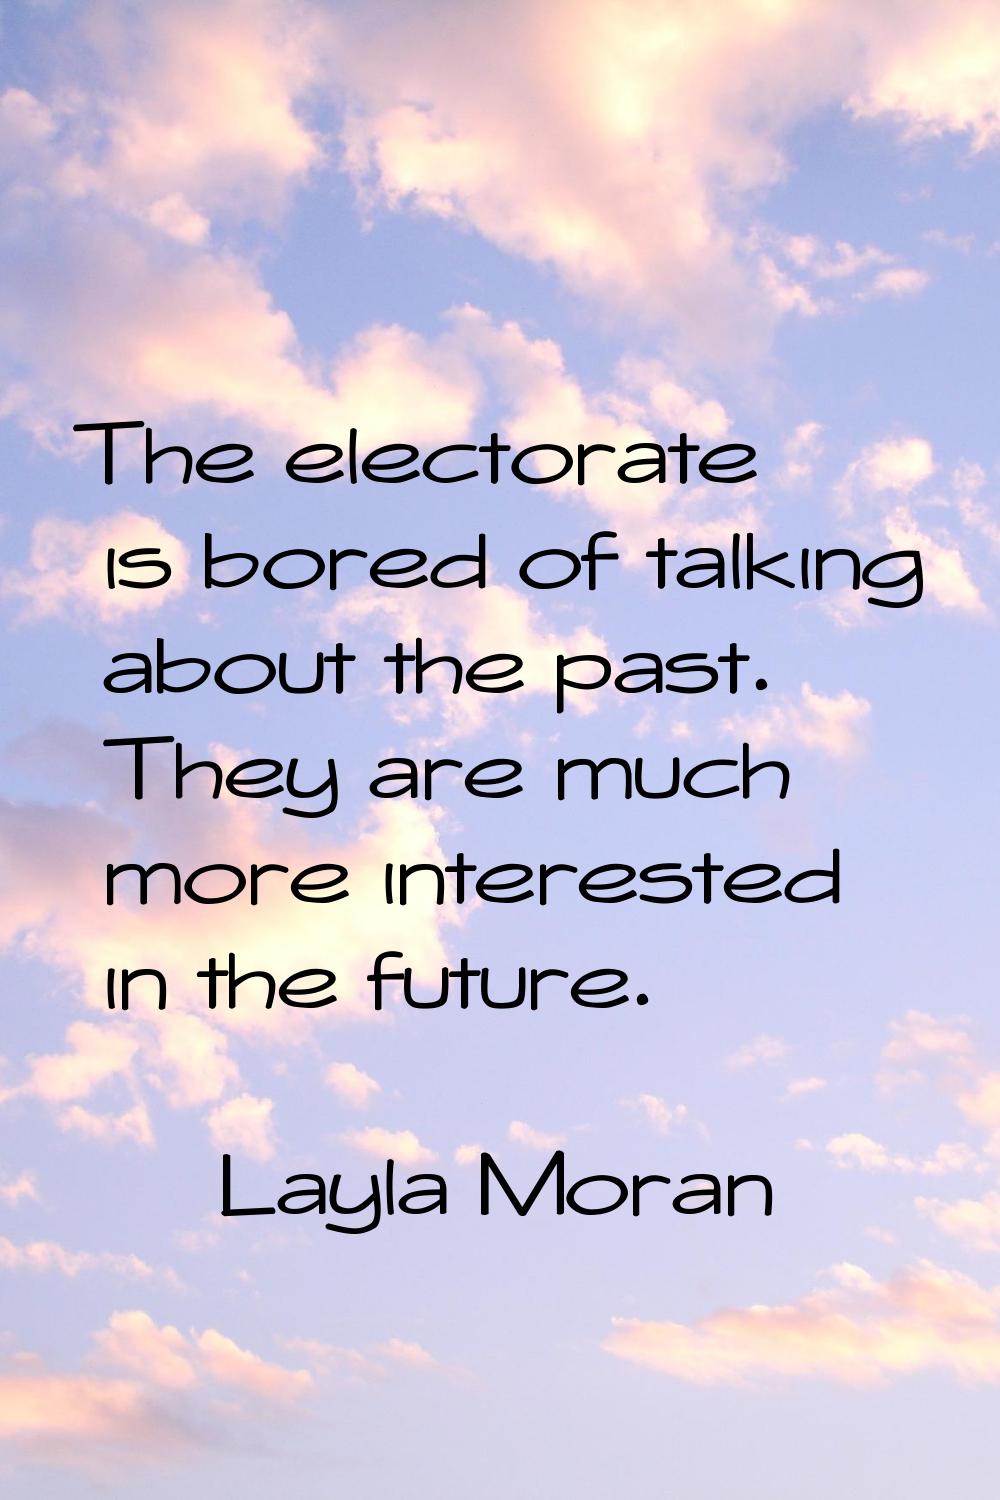 The electorate is bored of talking about the past. They are much more interested in the future.